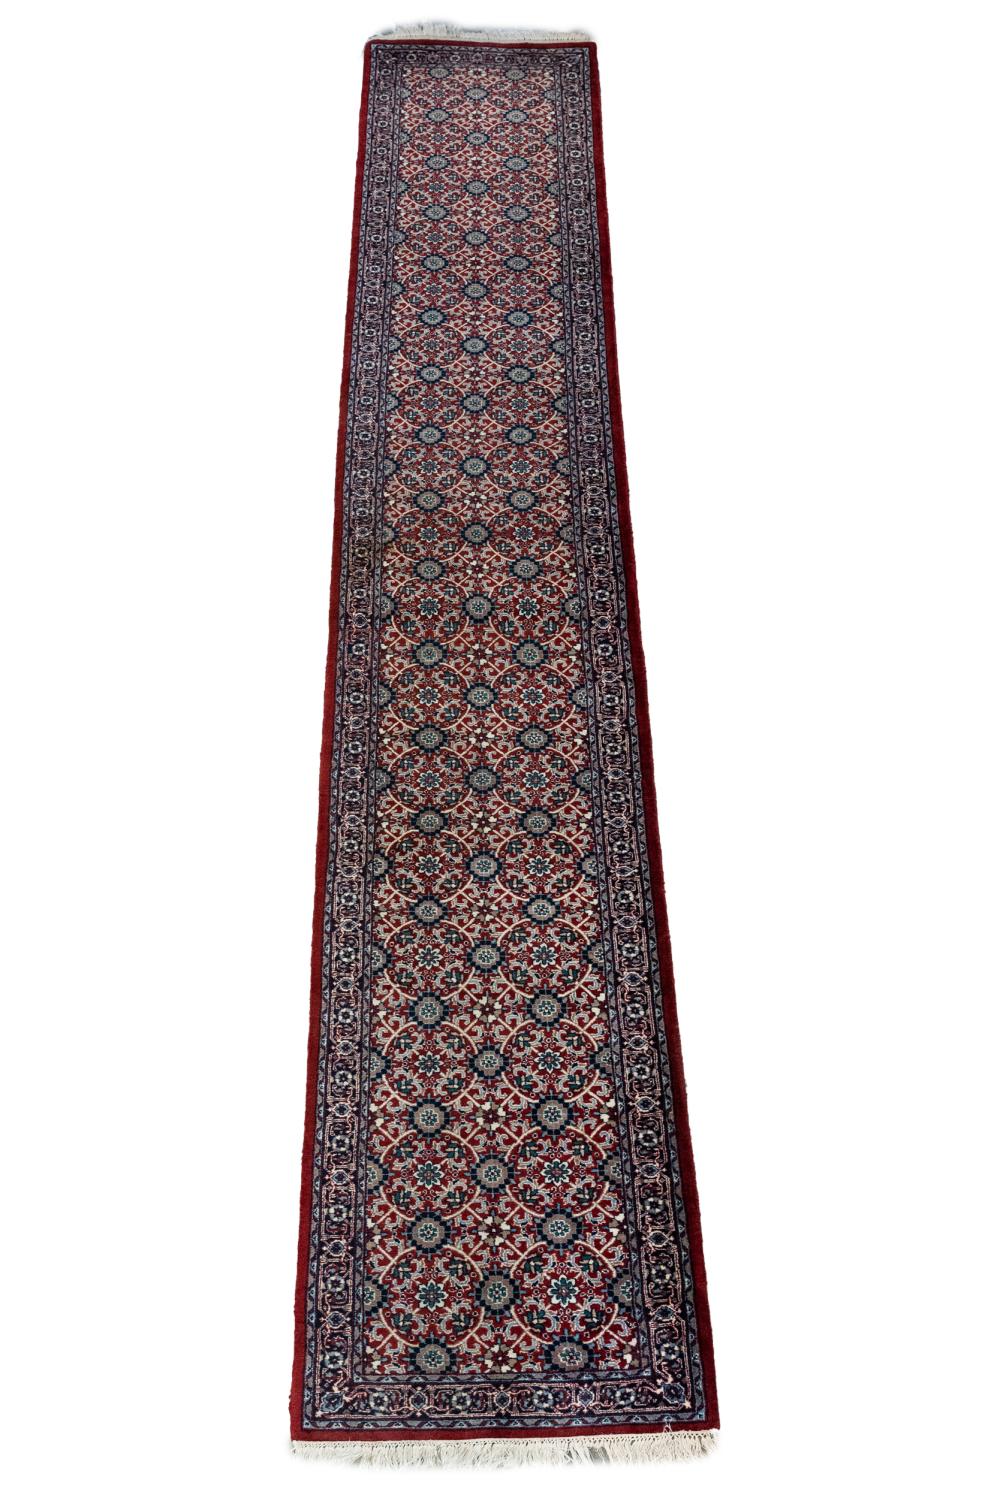 PERSIAN RUNNERwith floral red and